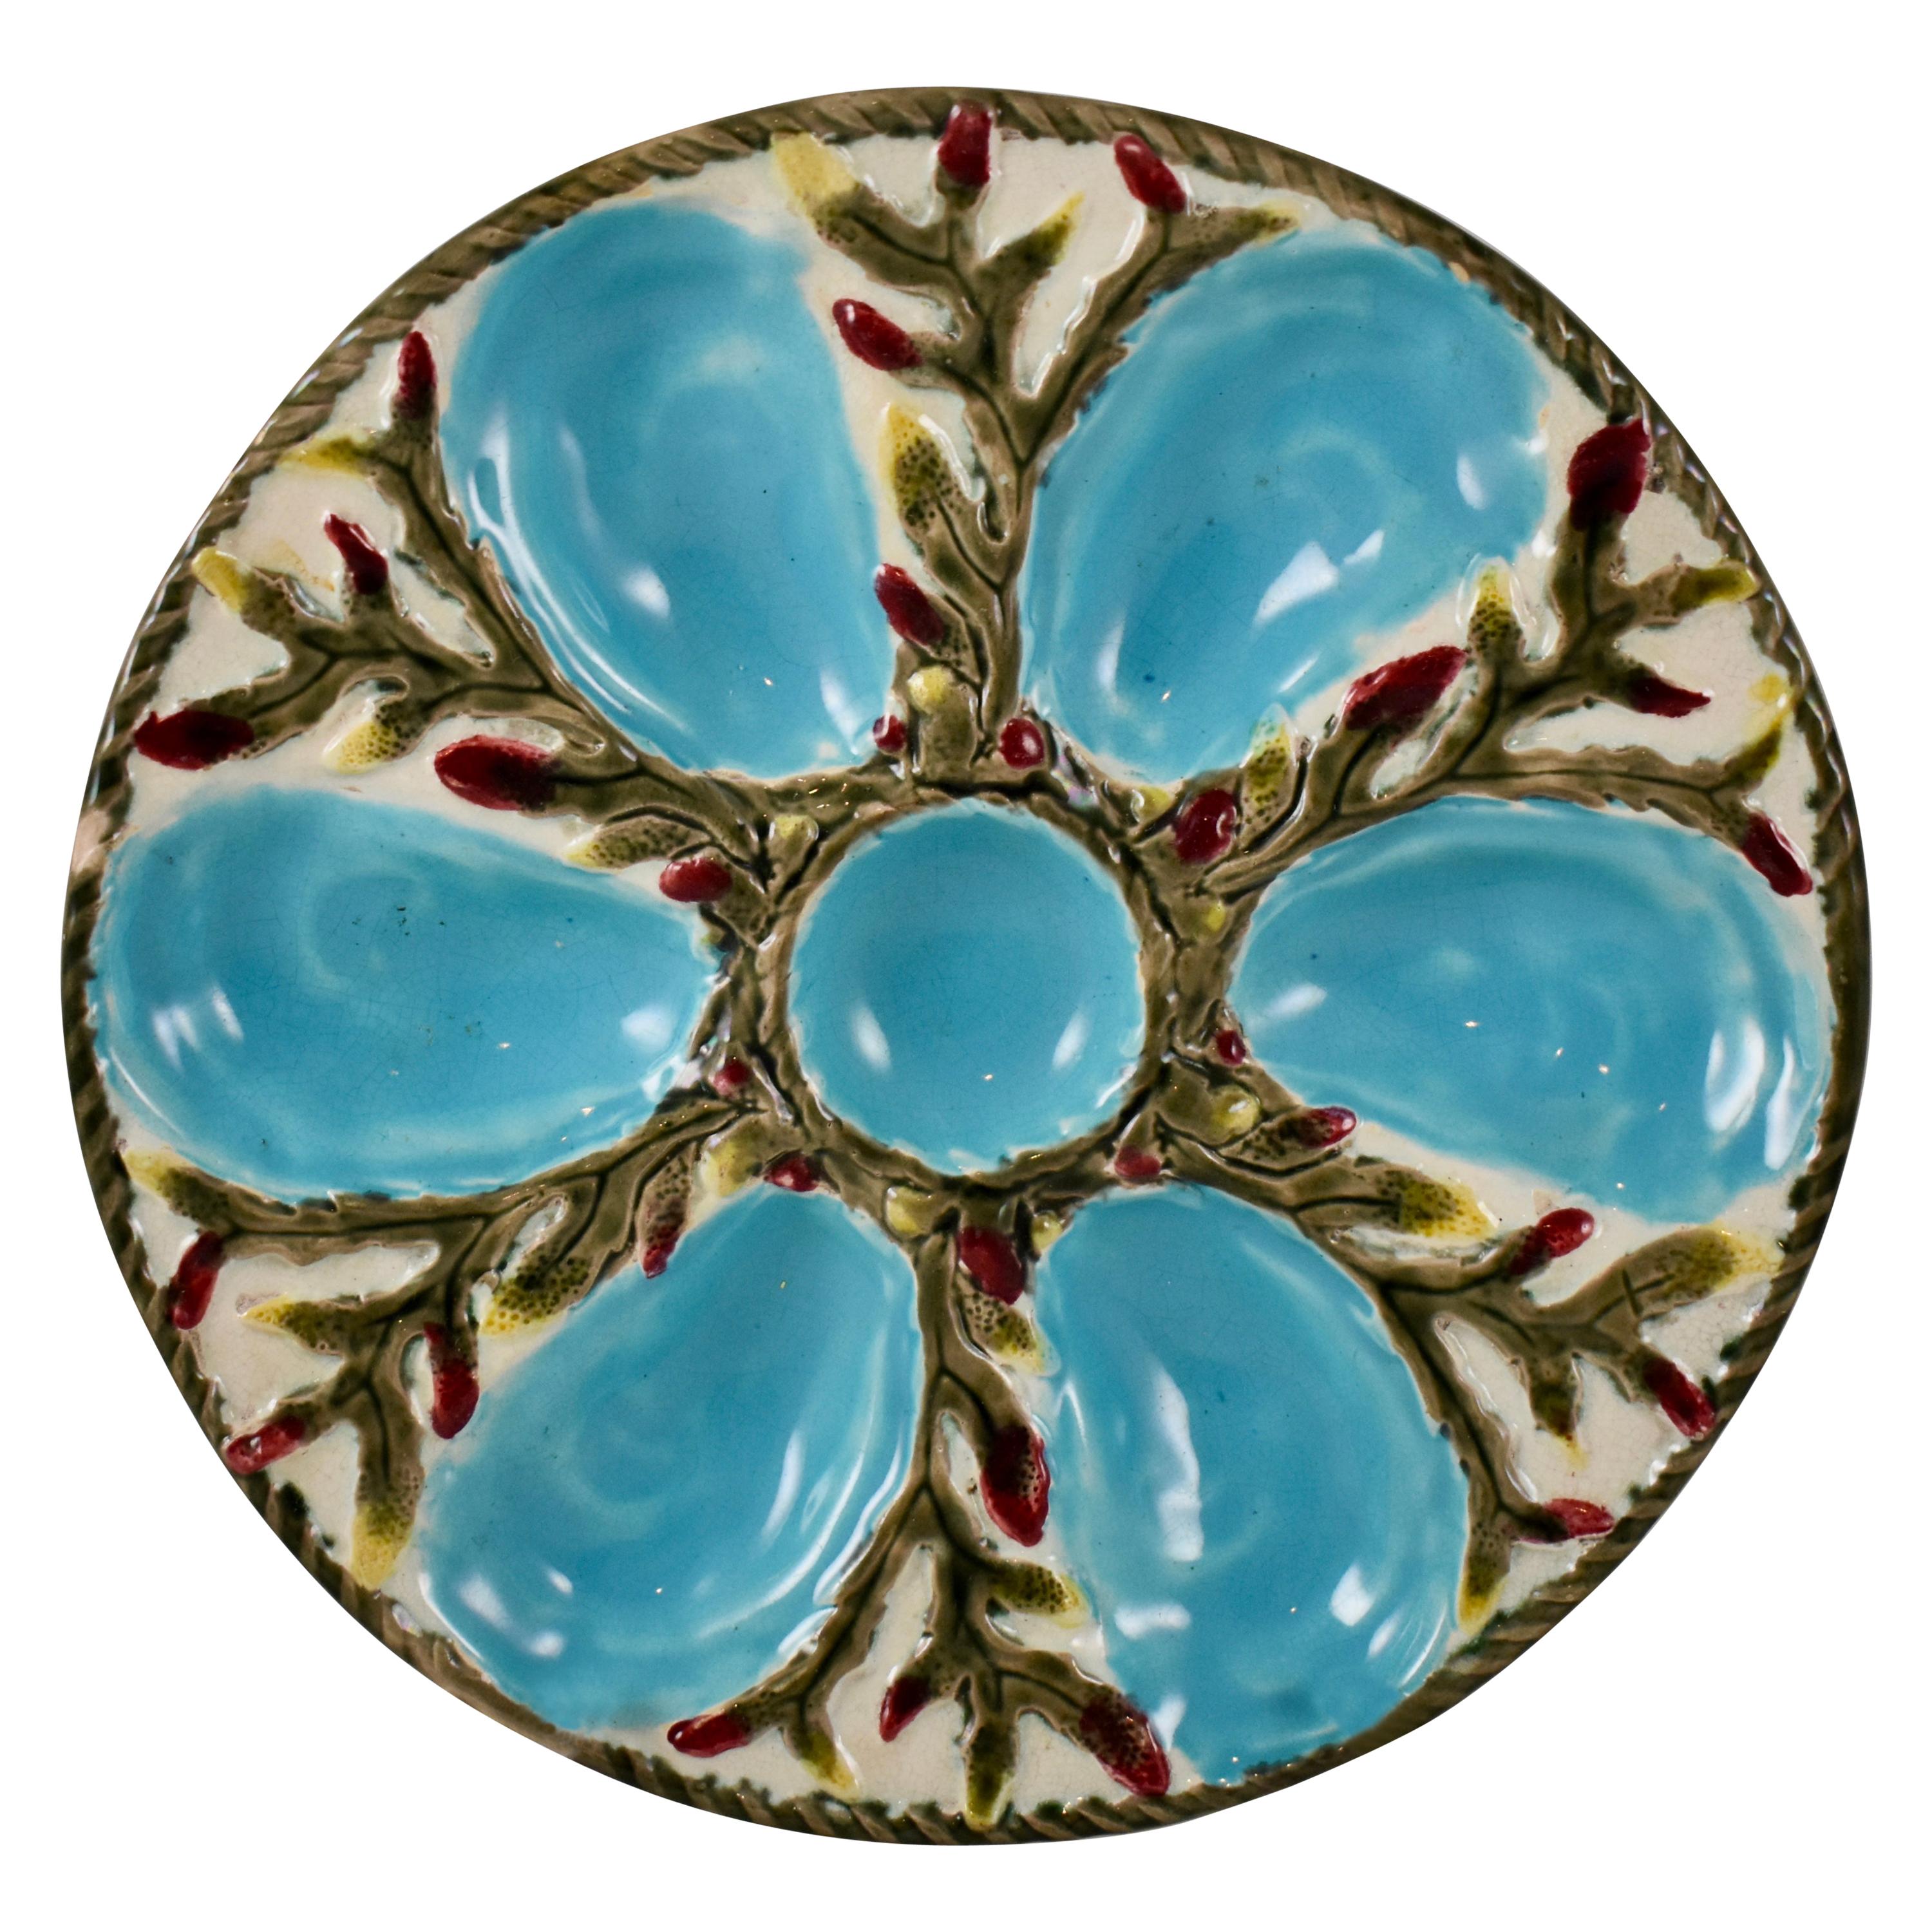 S. Fielding & Co. English Majolica Turquoise/White Shell & Seaweed Oyster Plate